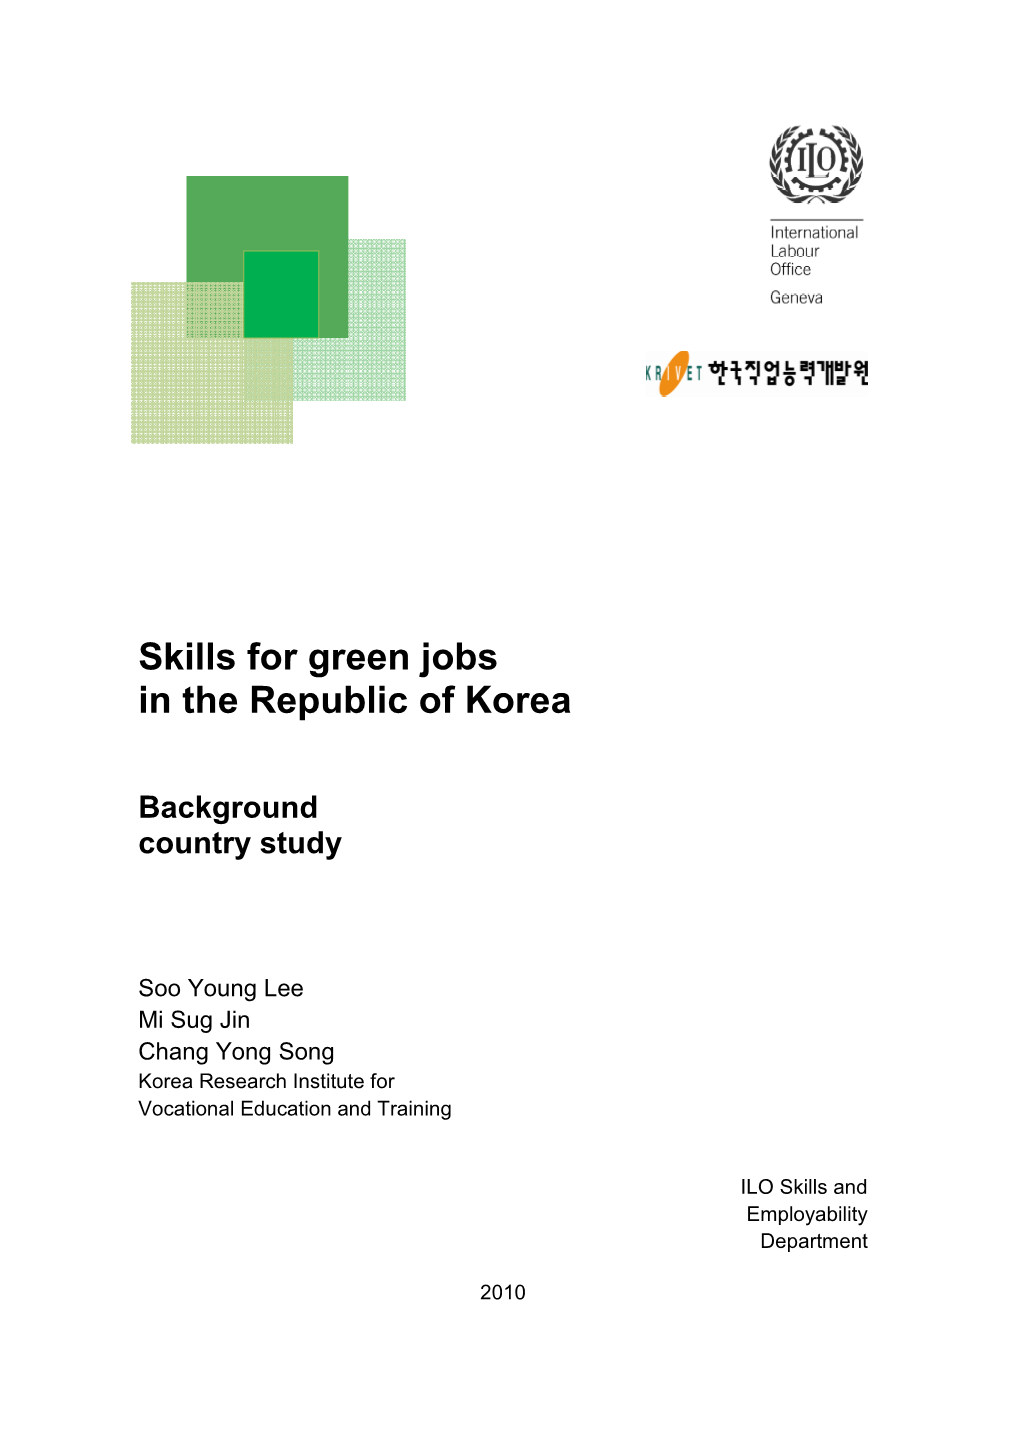 Skills for Green Jobs in the Republic of Korea